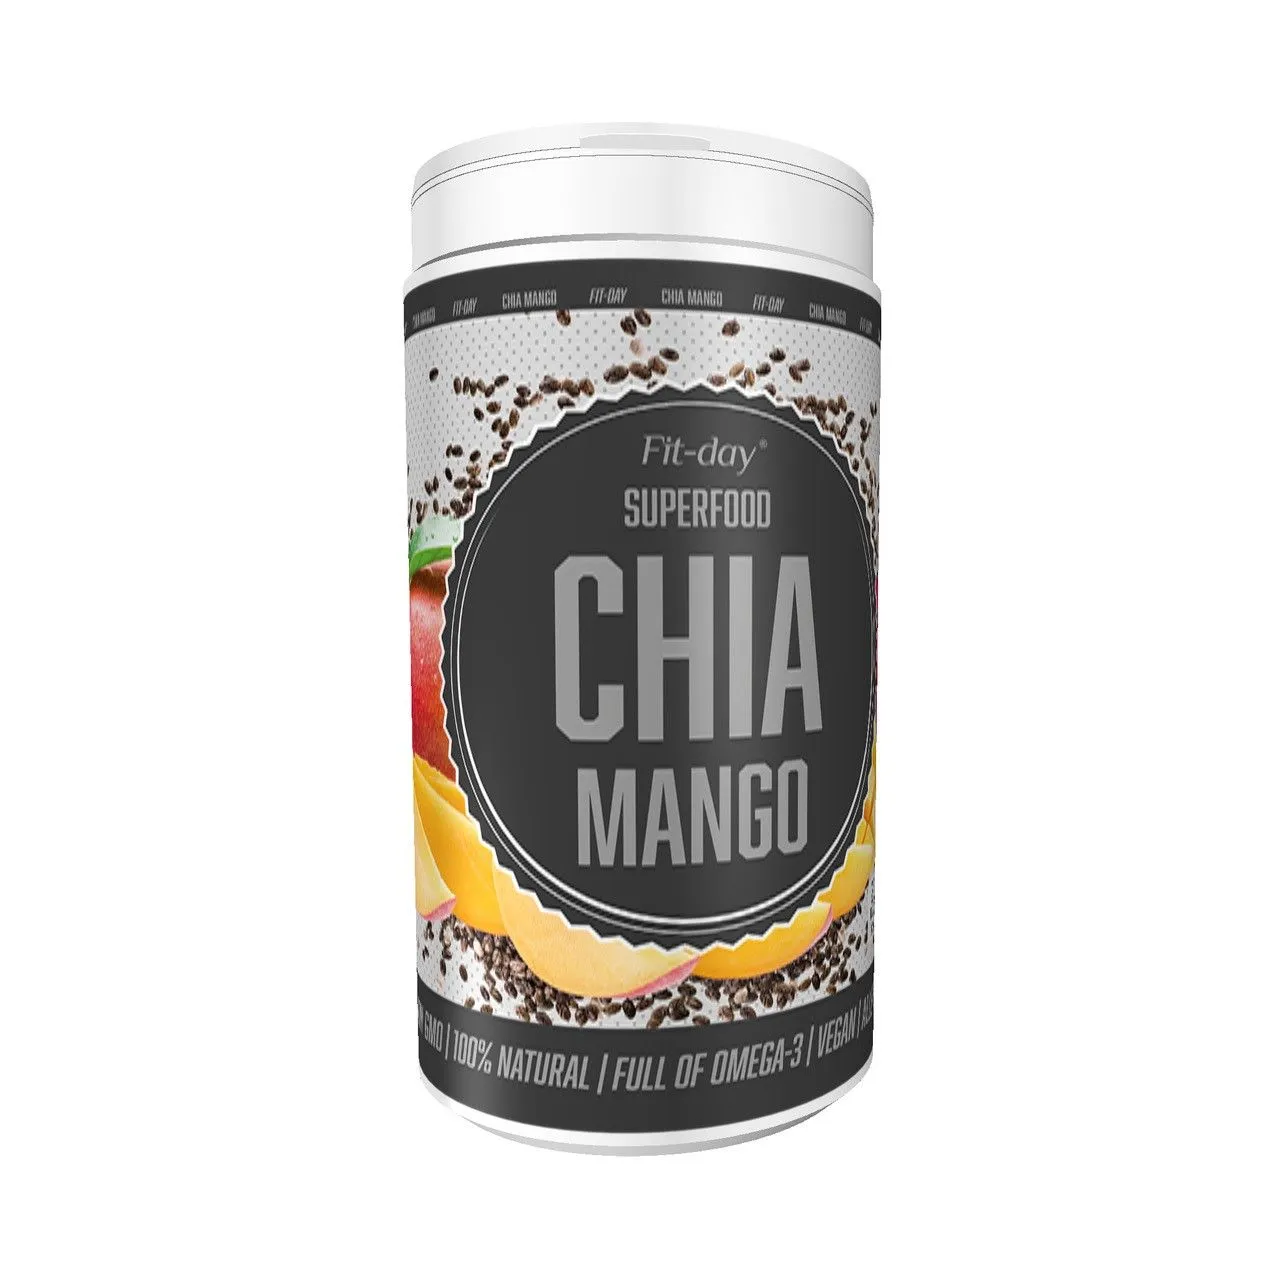 Fit-day Superfood Chia-Mango 600 g